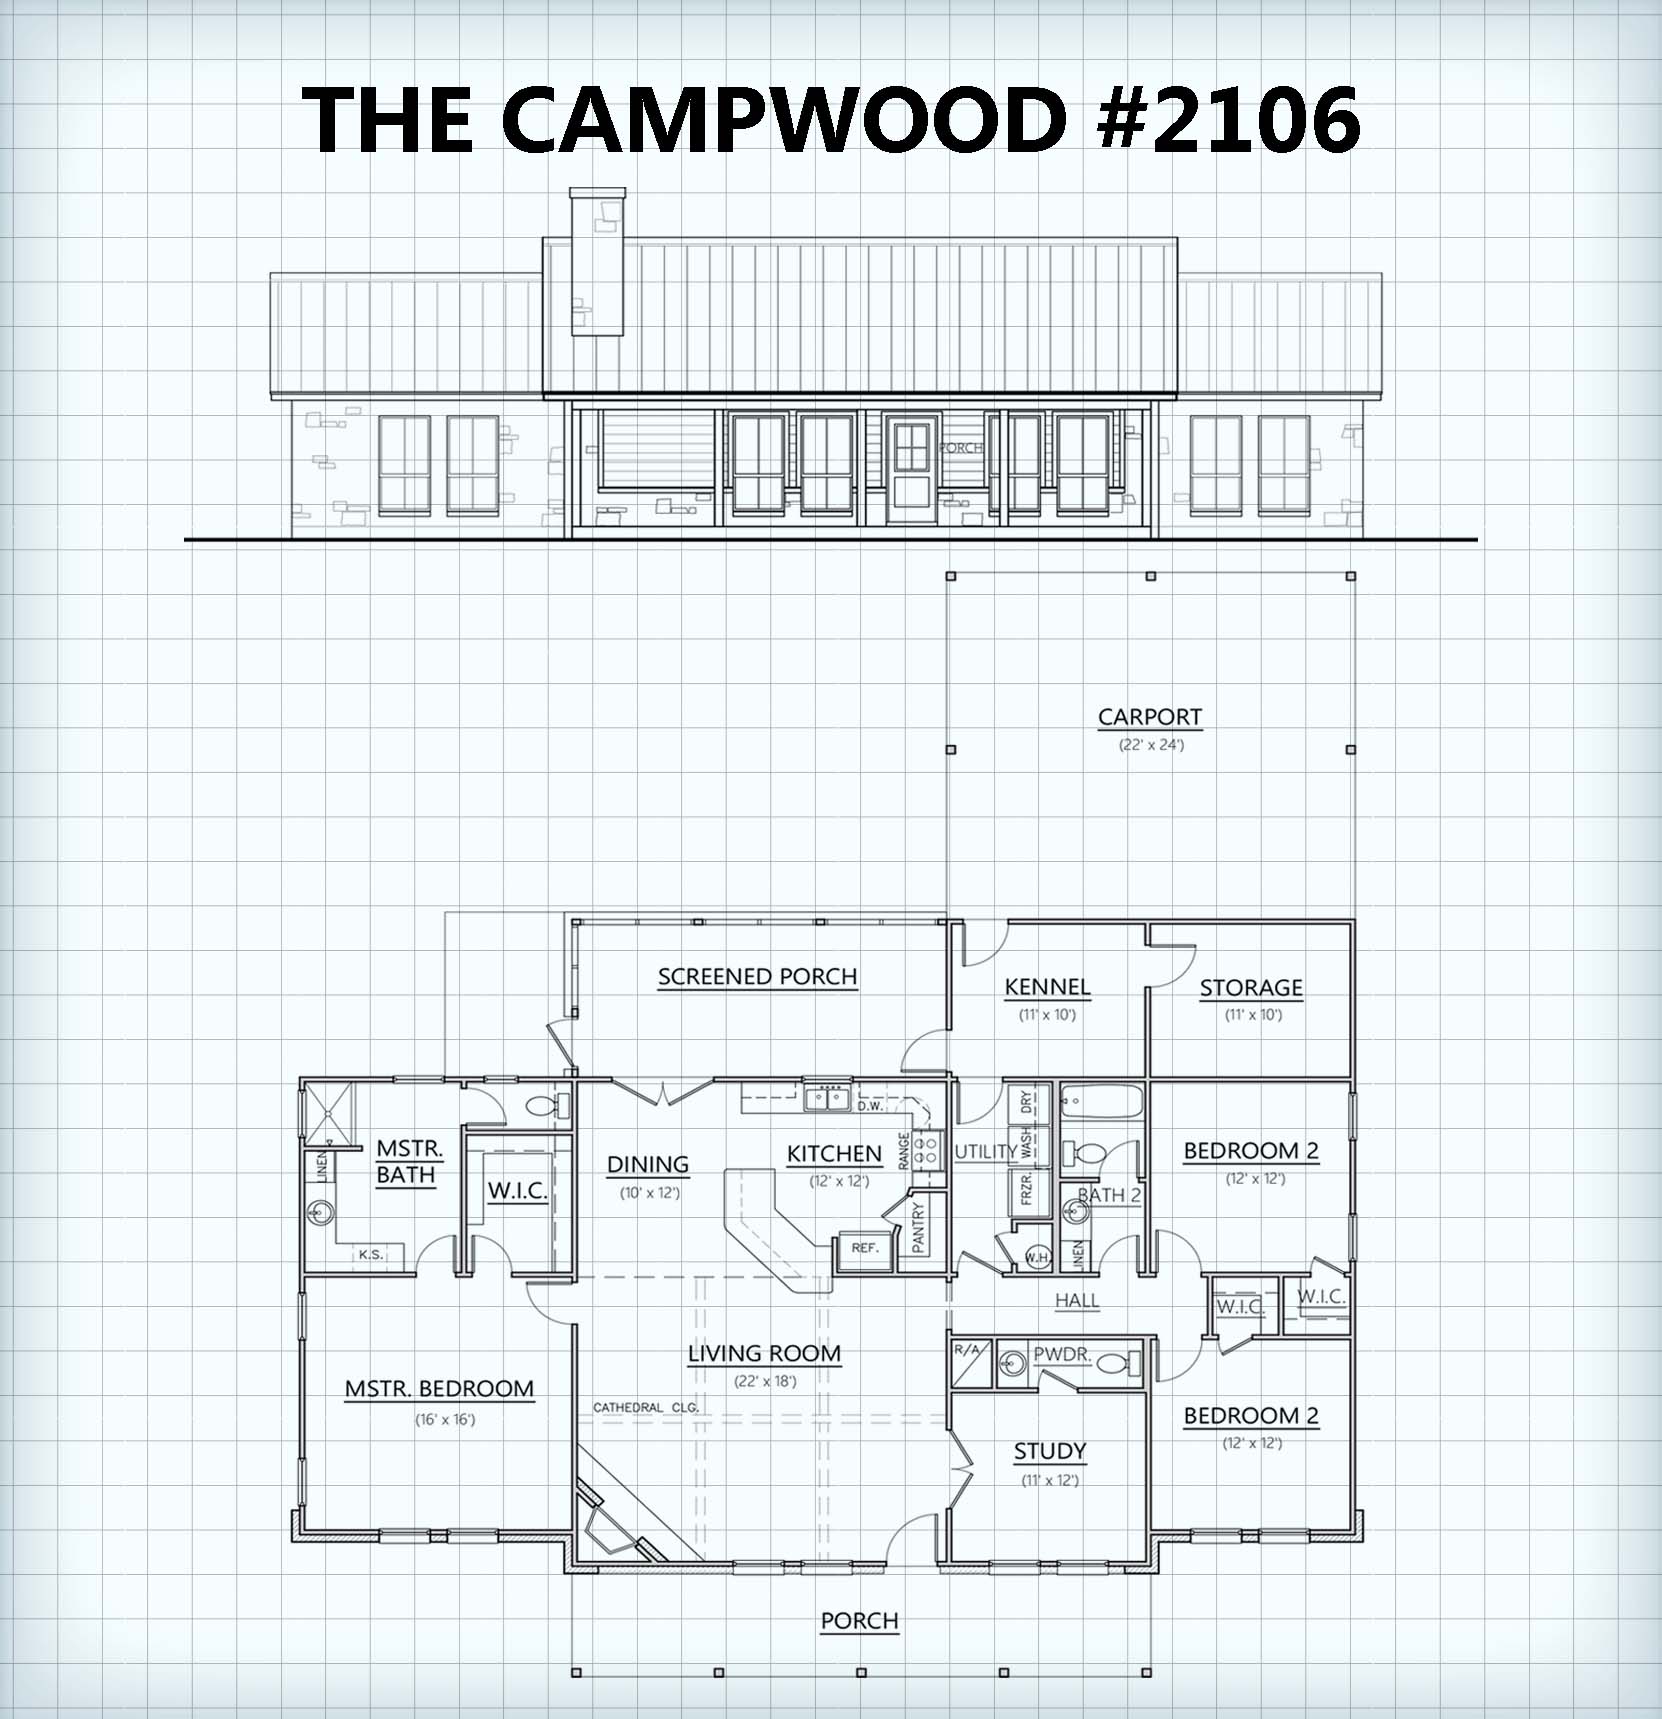 The Campwood #2106